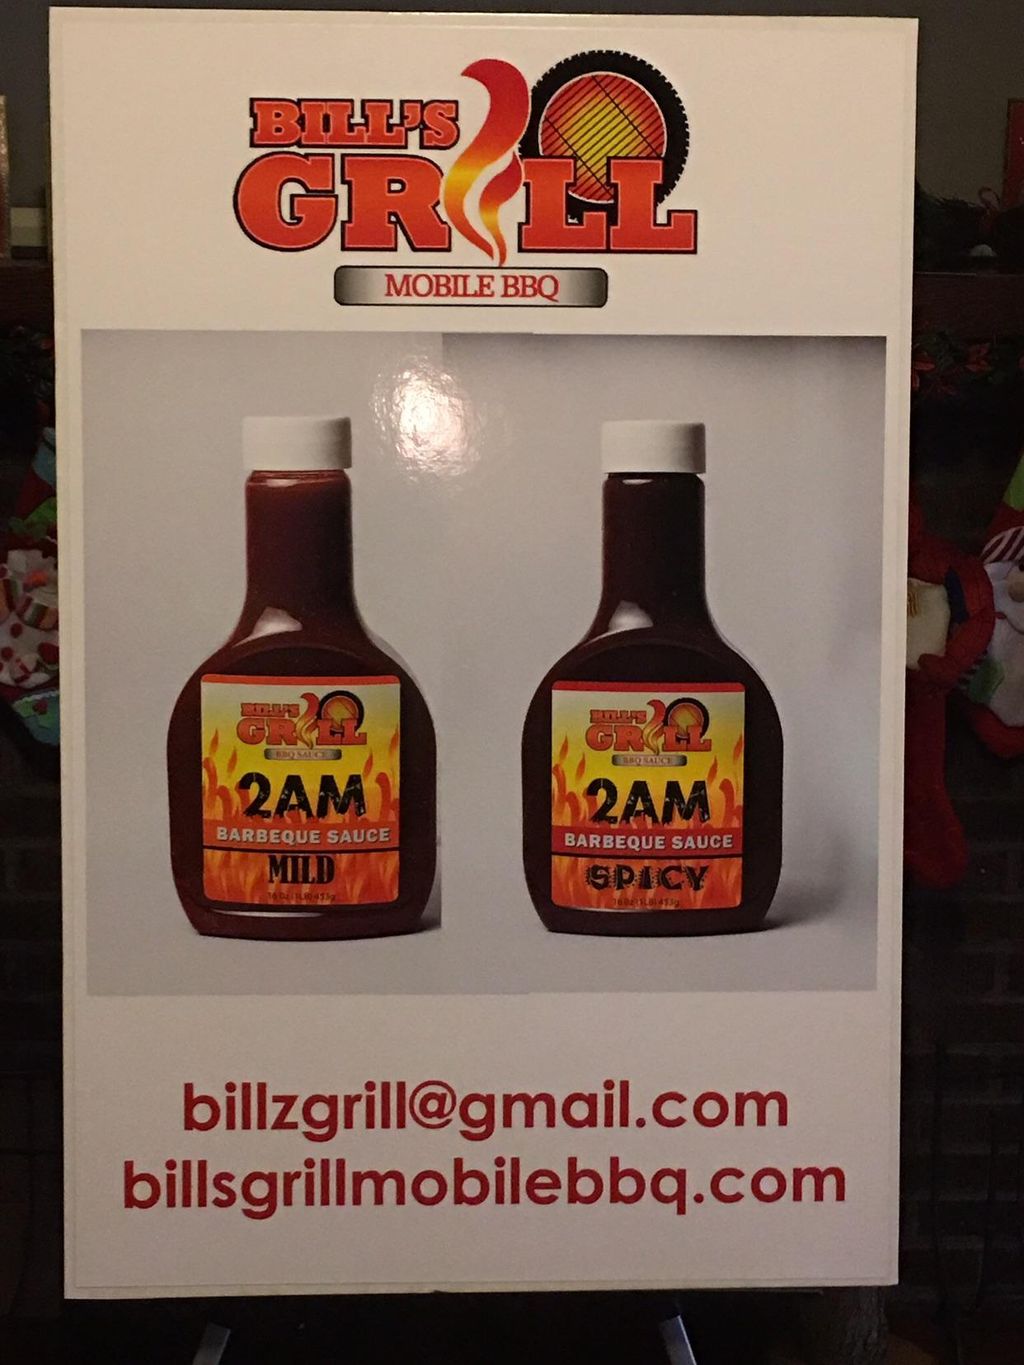 Bills Grill Bbq and catering